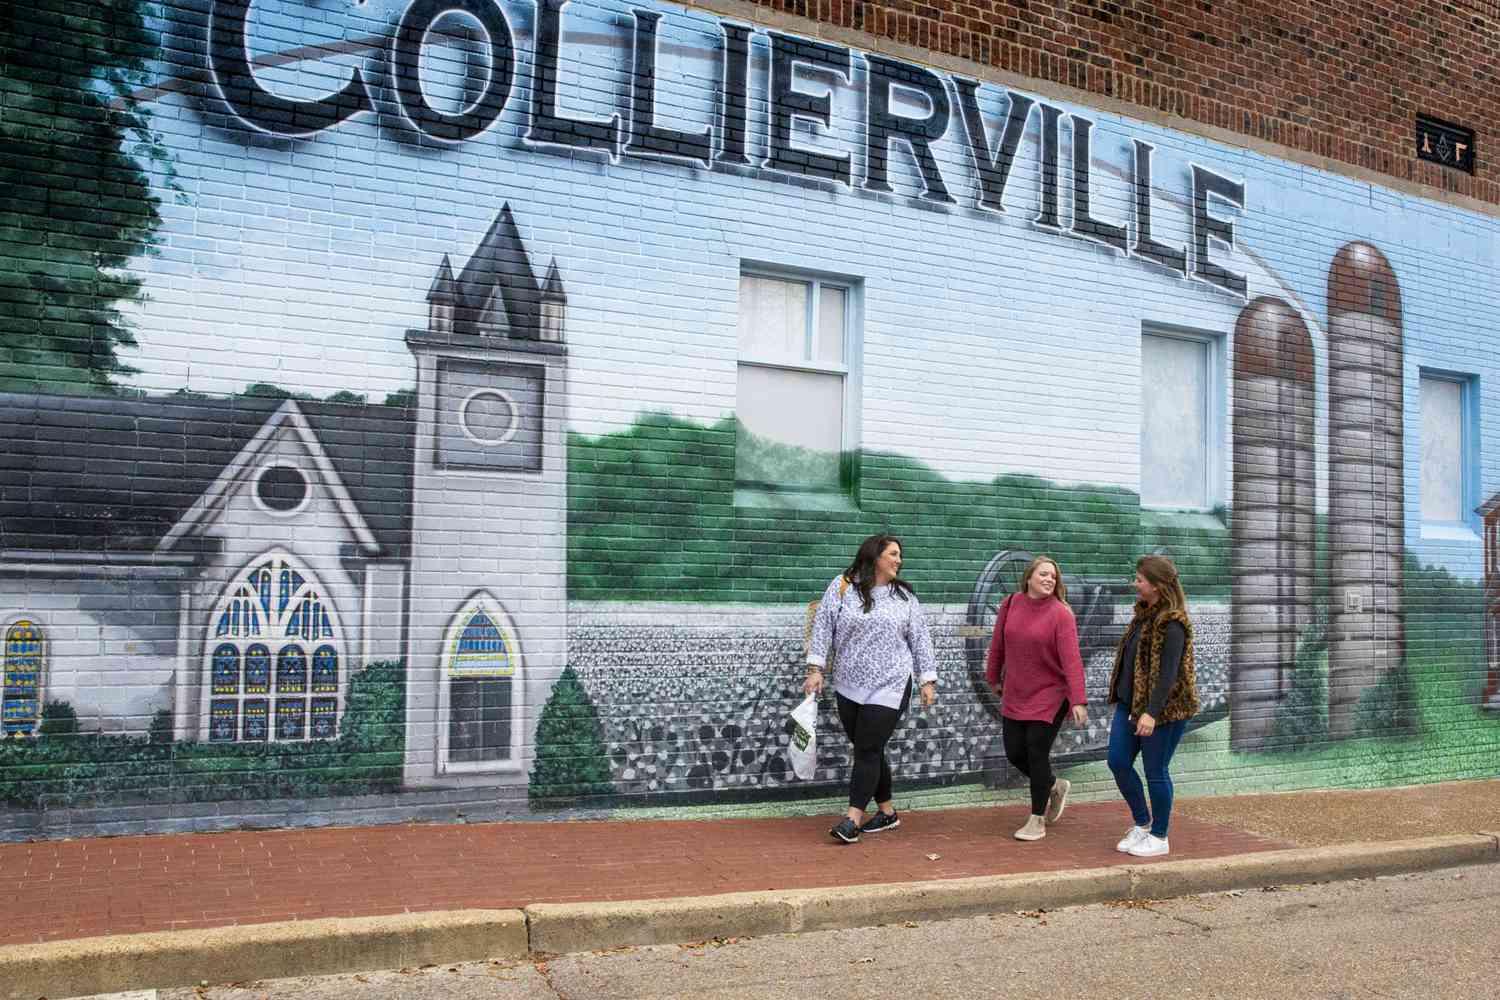 15-facts-about-art-and-music-scene-in-collierville-tennessee